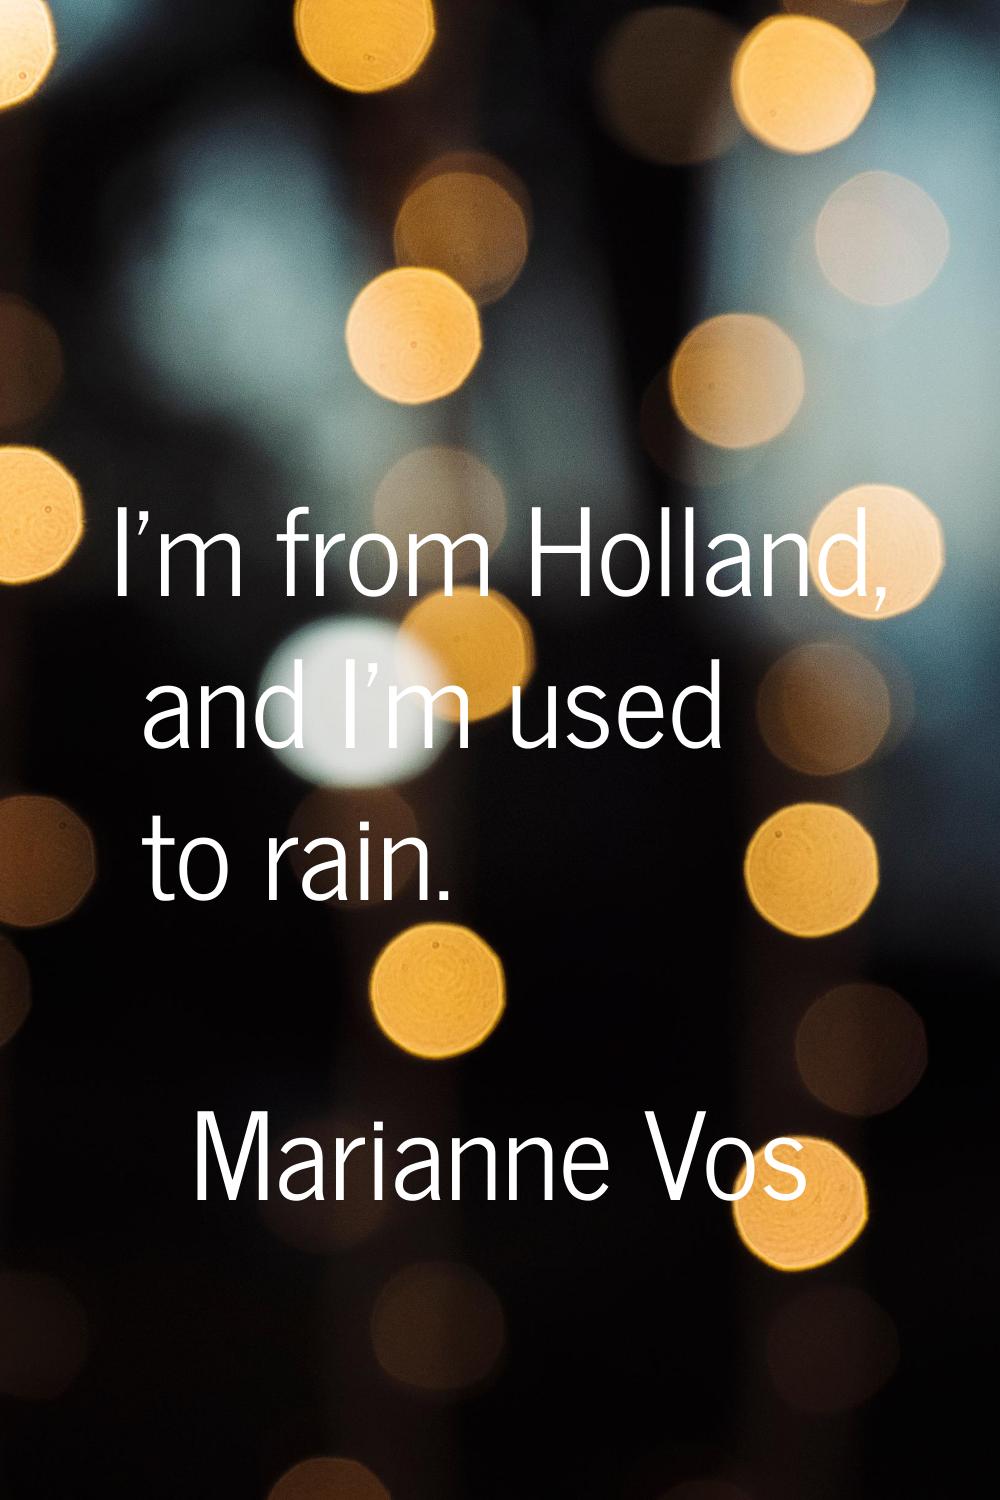 I'm from Holland, and I'm used to rain.